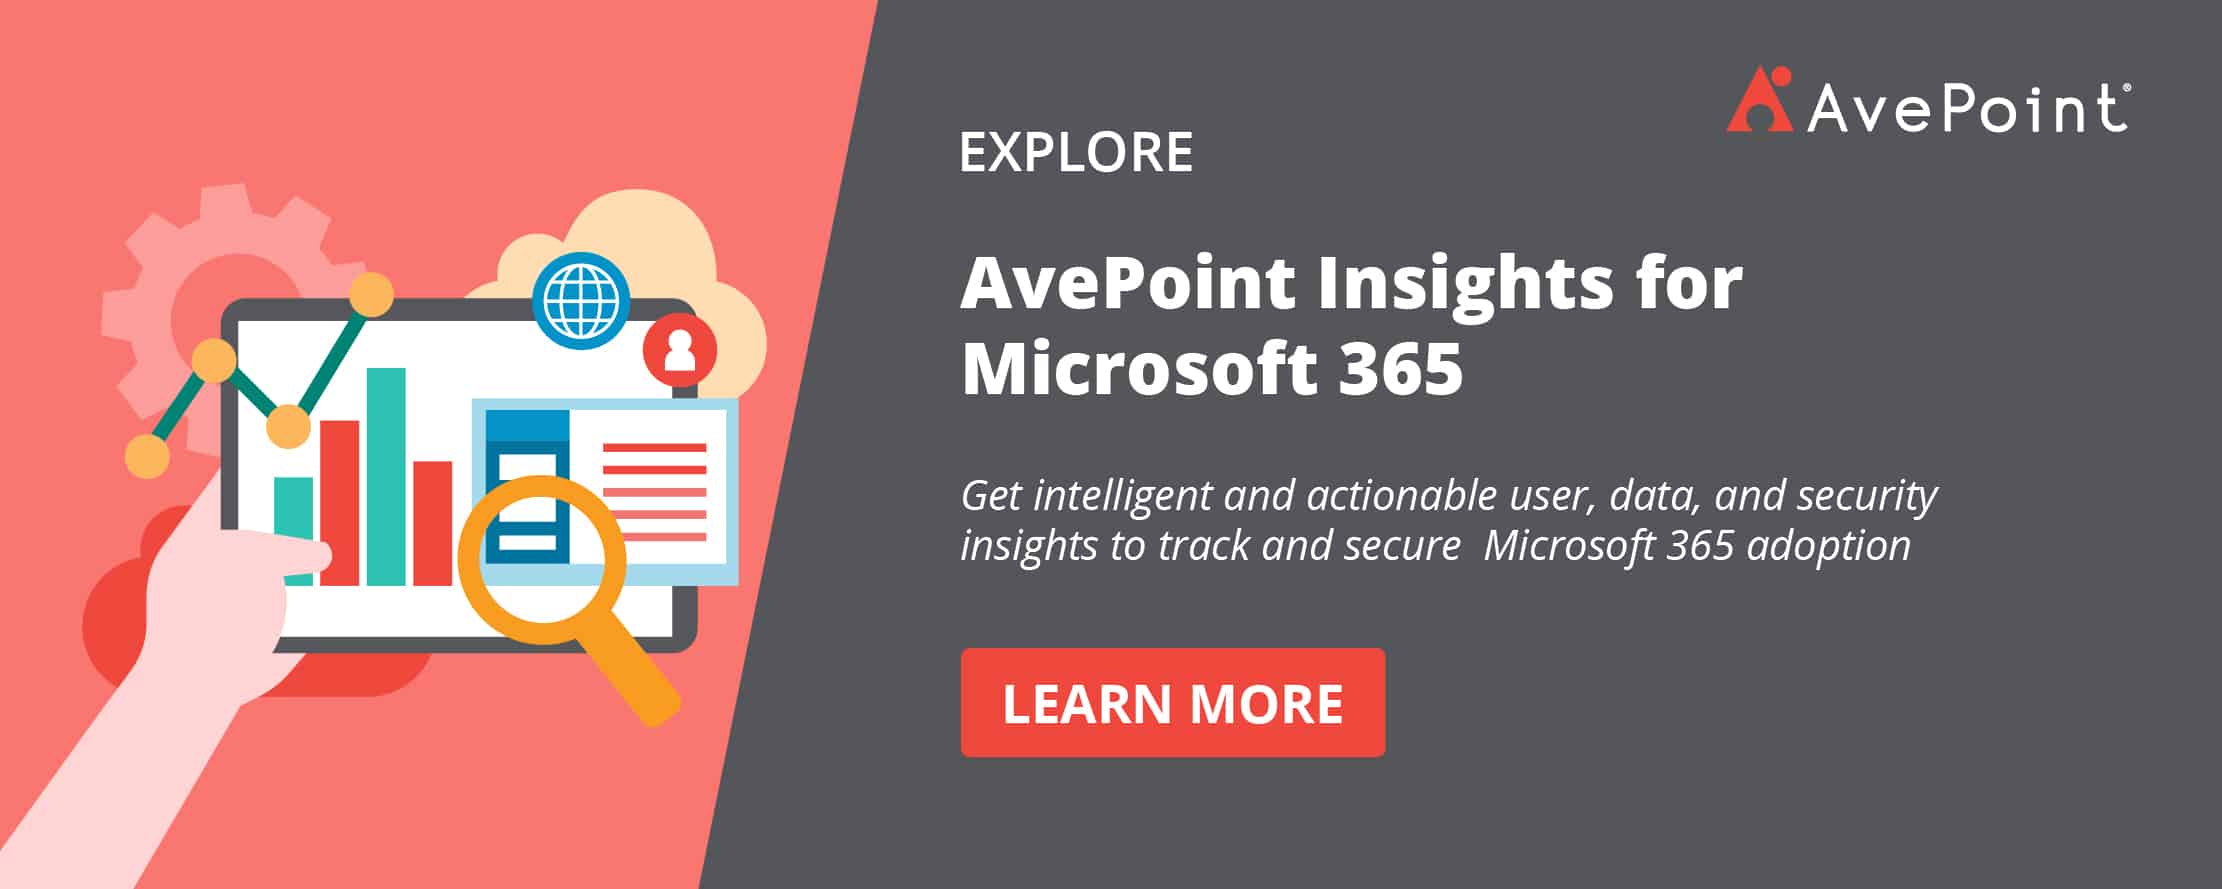 avepoint-insights-for-microsoft-365